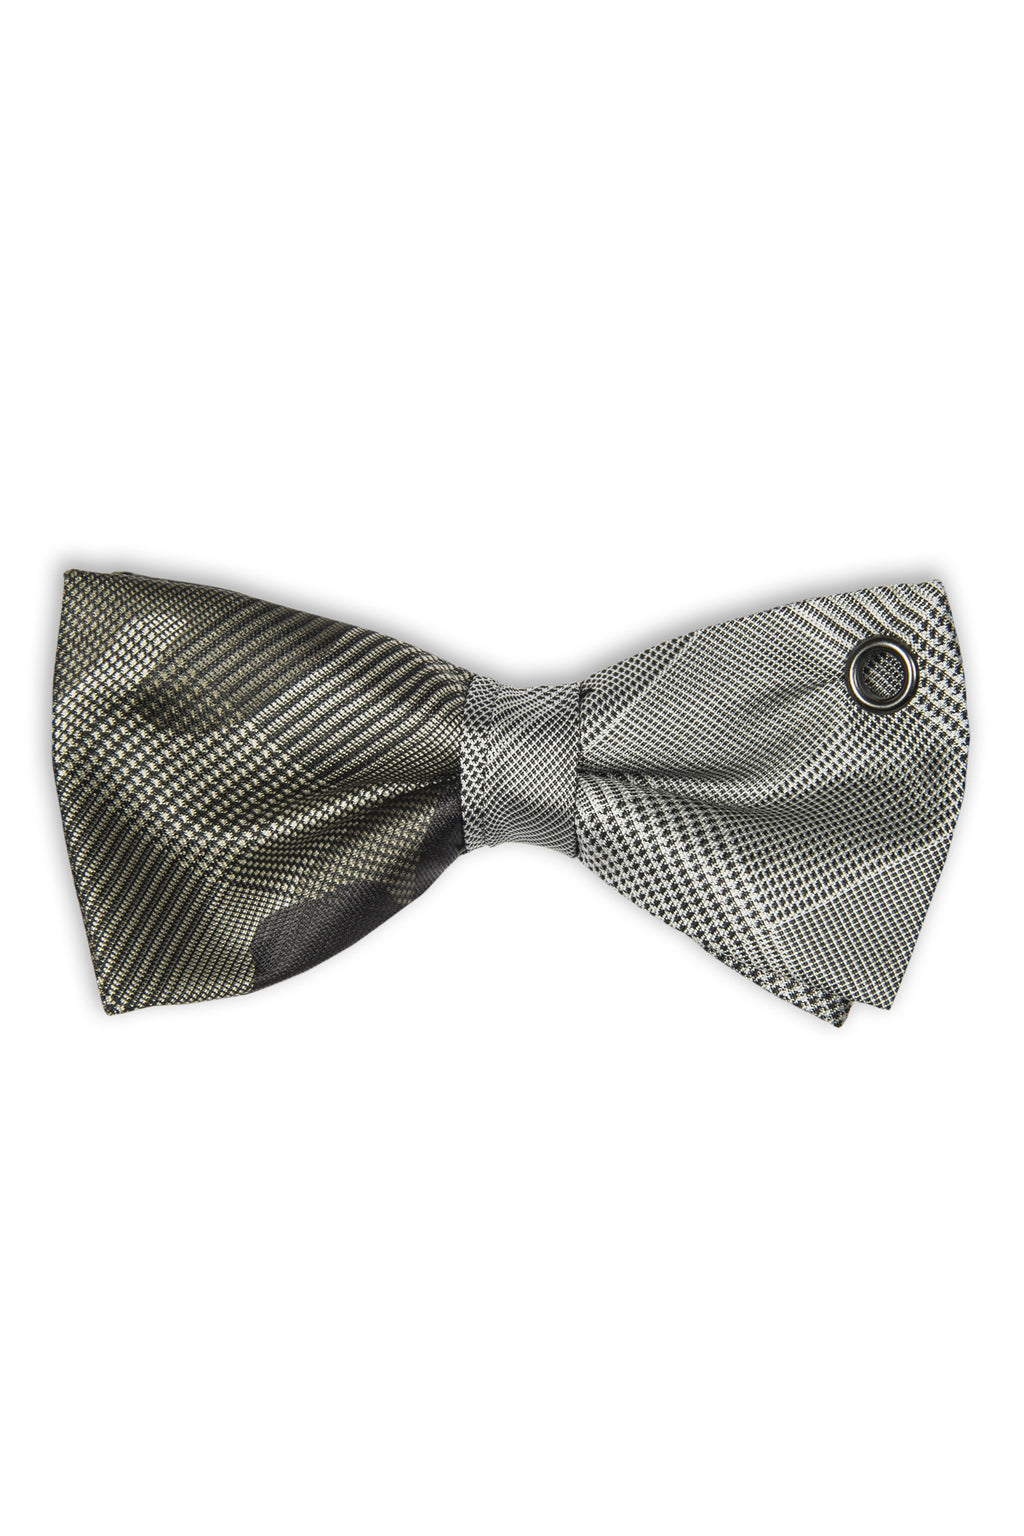 Noeud papillon en duo avec tissu camouflage - Bow tie with camouflage army italian fabric